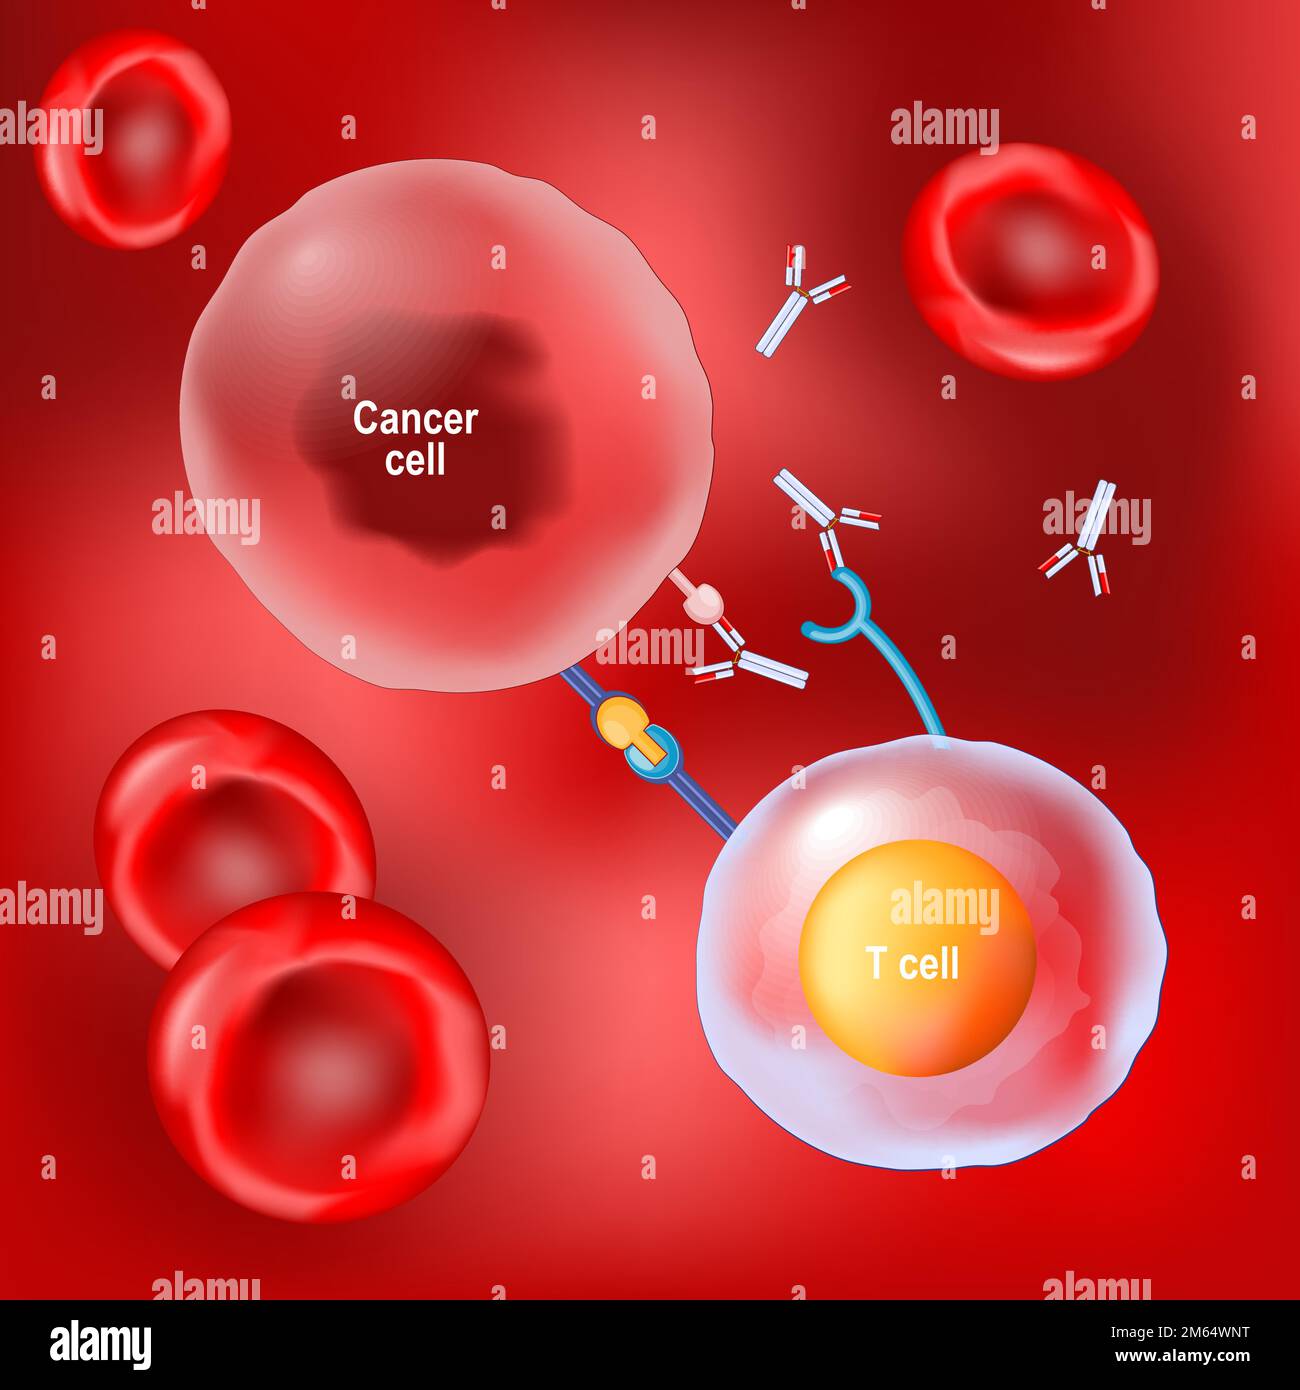 cancer therapy and monoclonal antibodies. Red blood cells, T cell and Cancer cell on a red background. Vector Stock Vector